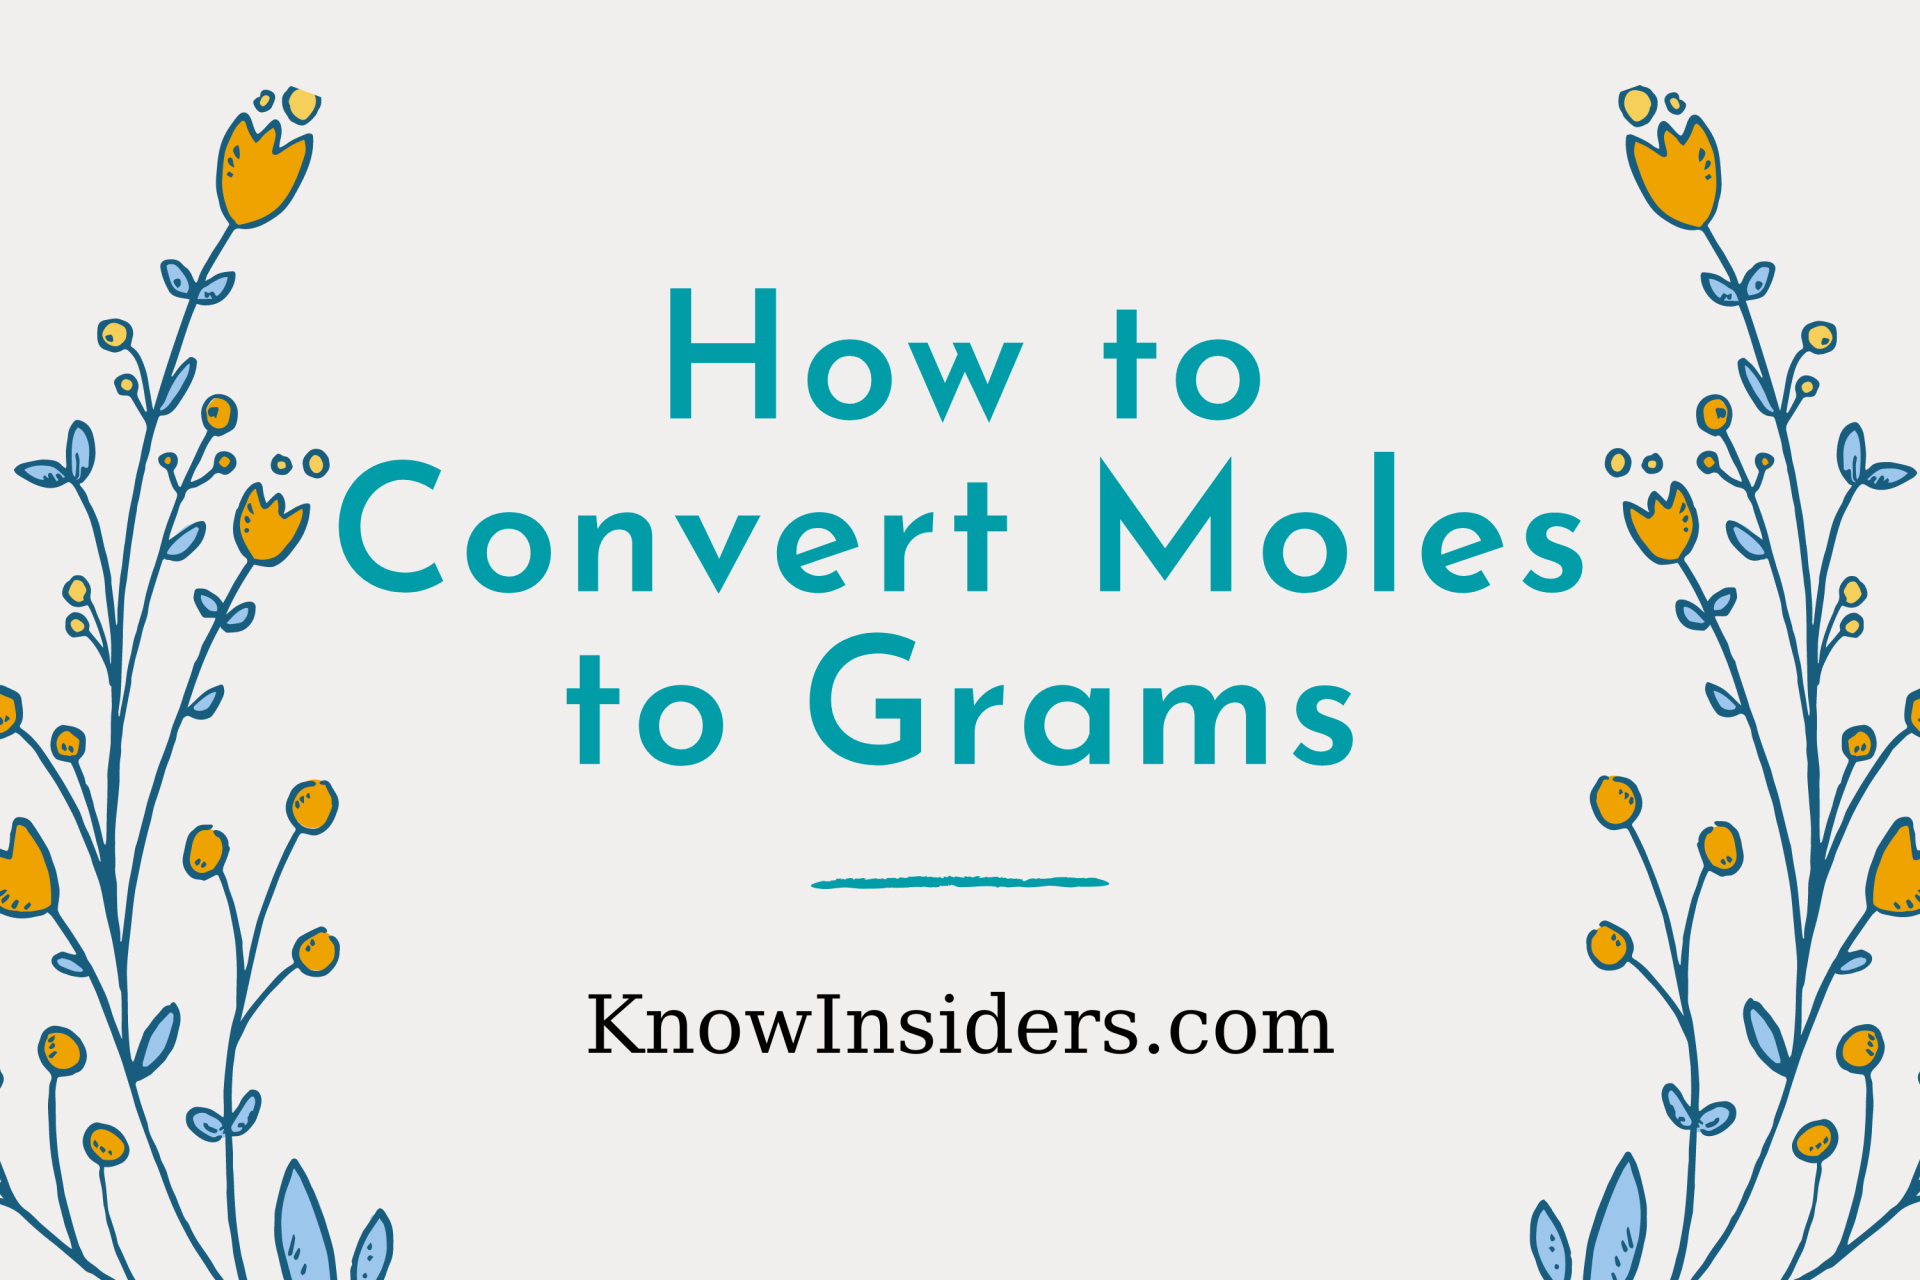 How to Convert Moles to Grams